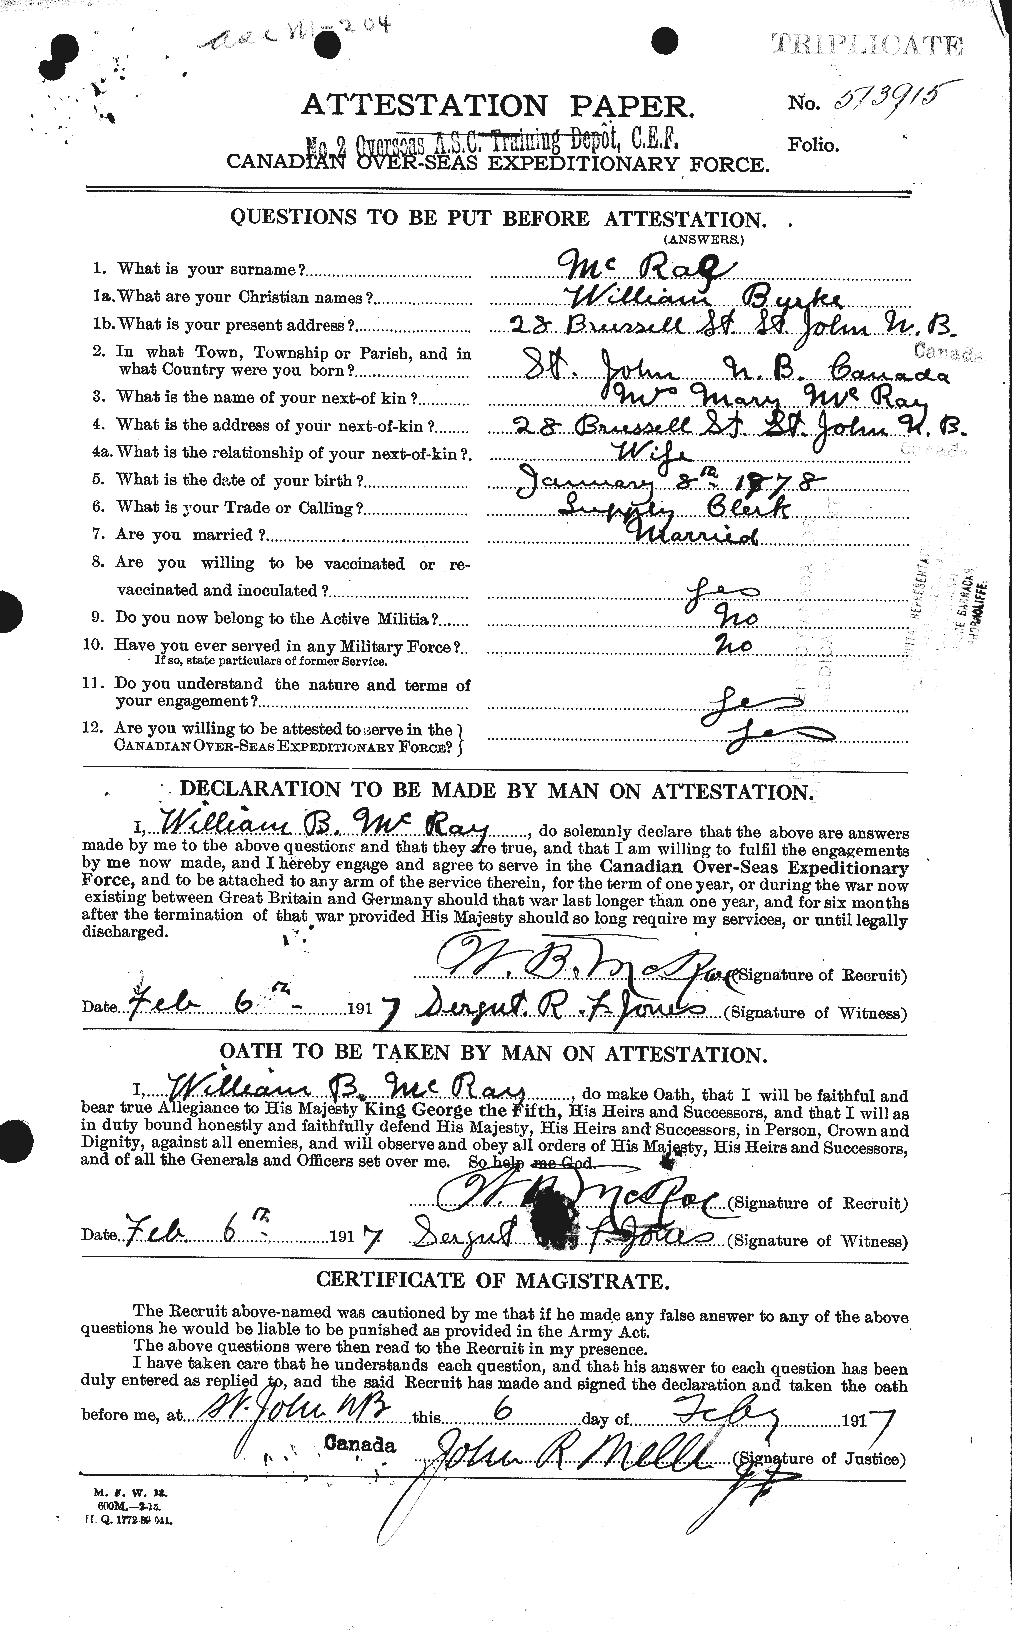 Personnel Records of the First World War - CEF 542985a